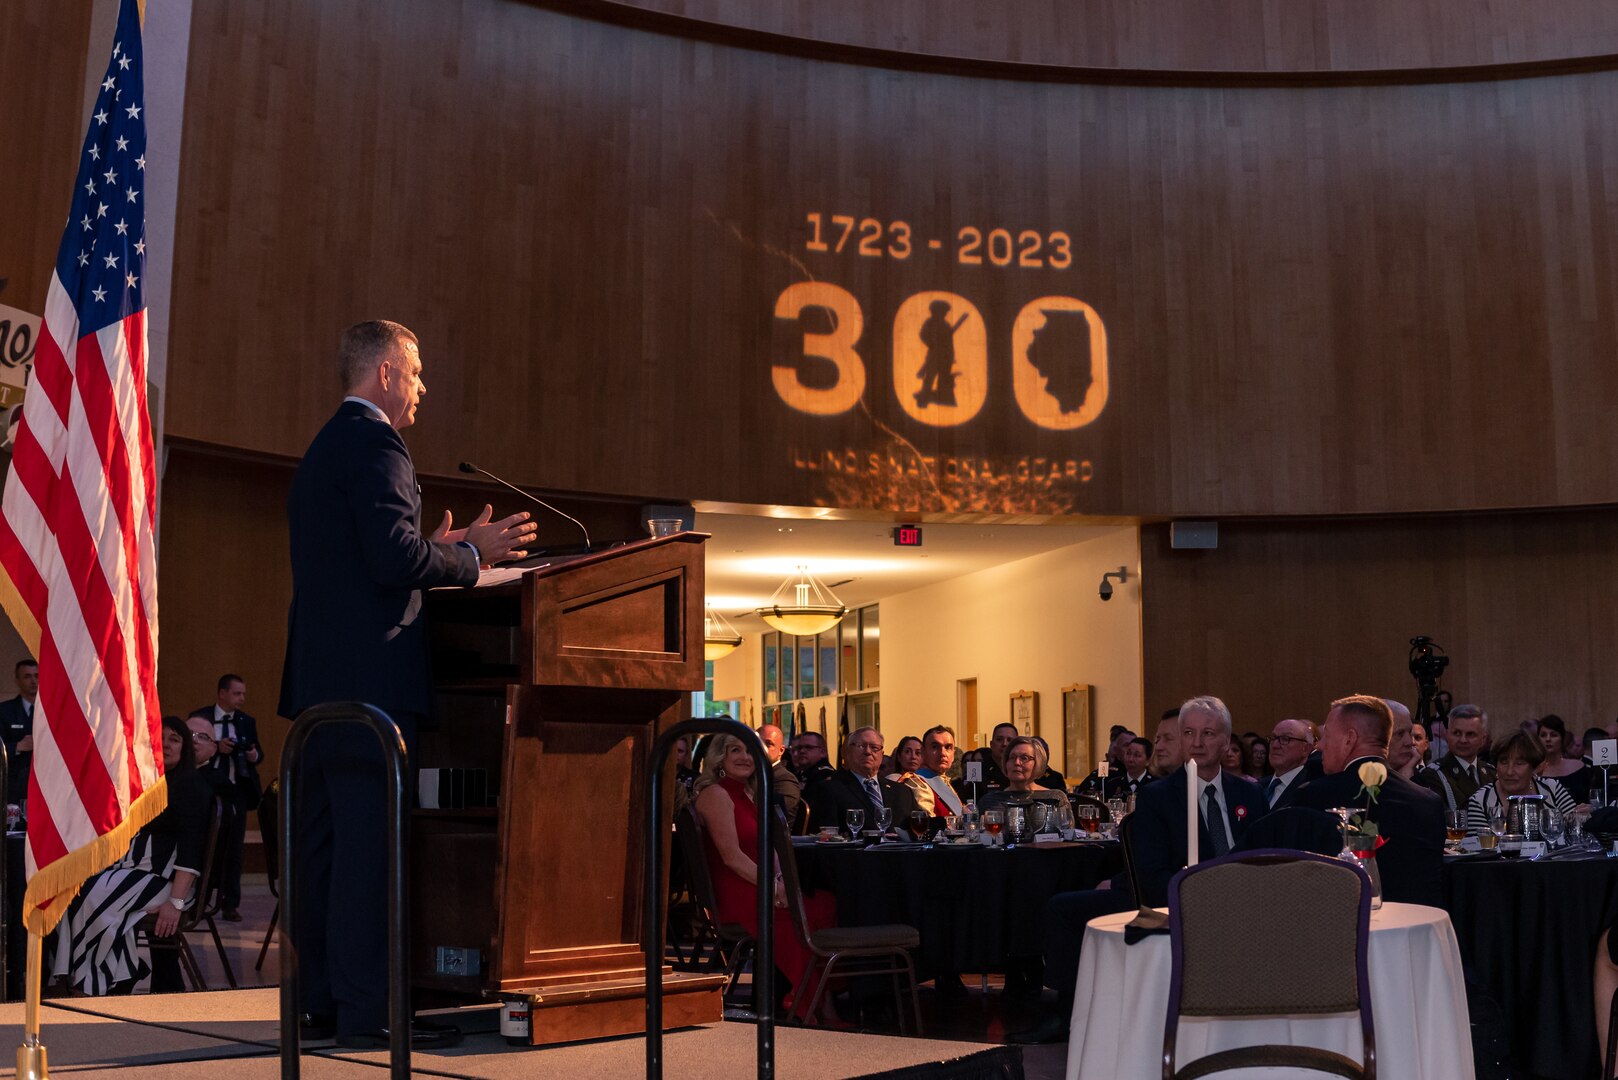 U.S. Air Force Maj. Gen. Richard Neely, the 40th adjutant general of the state of Illinois, gives opening remarks during the Illinois National Guard's 300th anniversary gala at in the Abraham Lincoln Presidential Library and Museum in Springfield, Illinois, May 6, 2023.